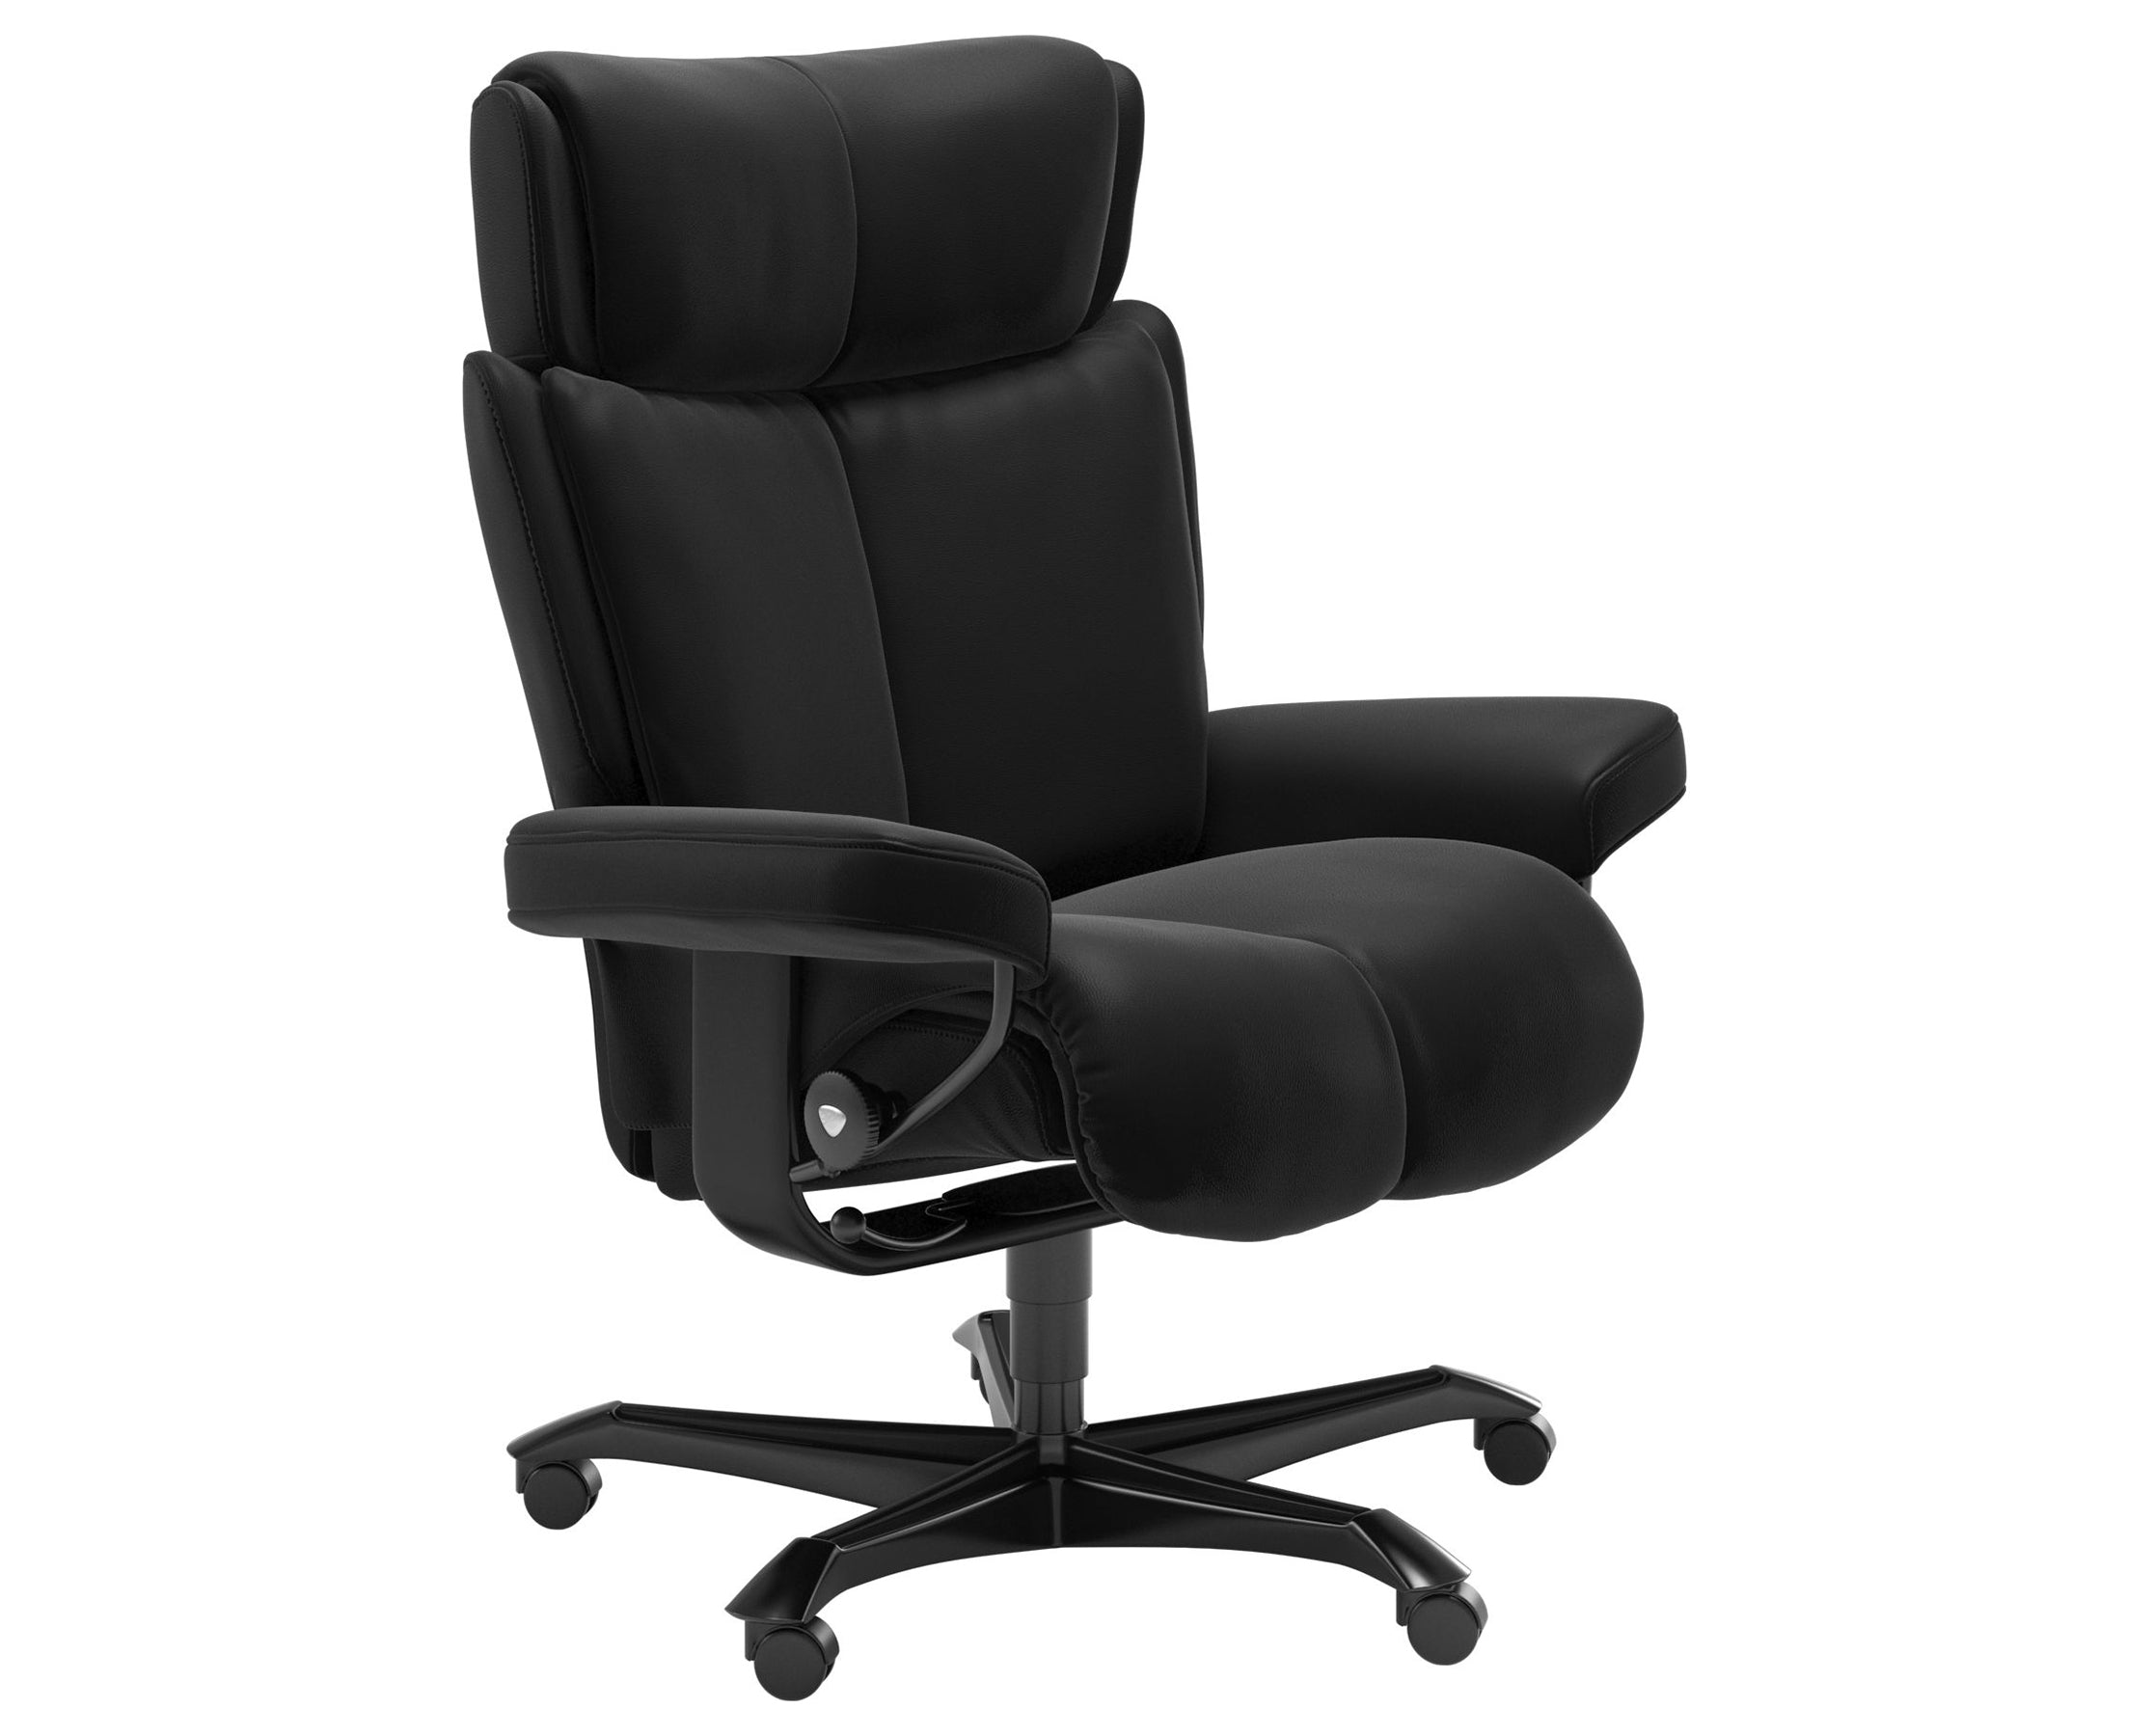 Paloma Leather Black M and Black Base | Stressless Magic Home Office Chair | Valley Ridge Furniture